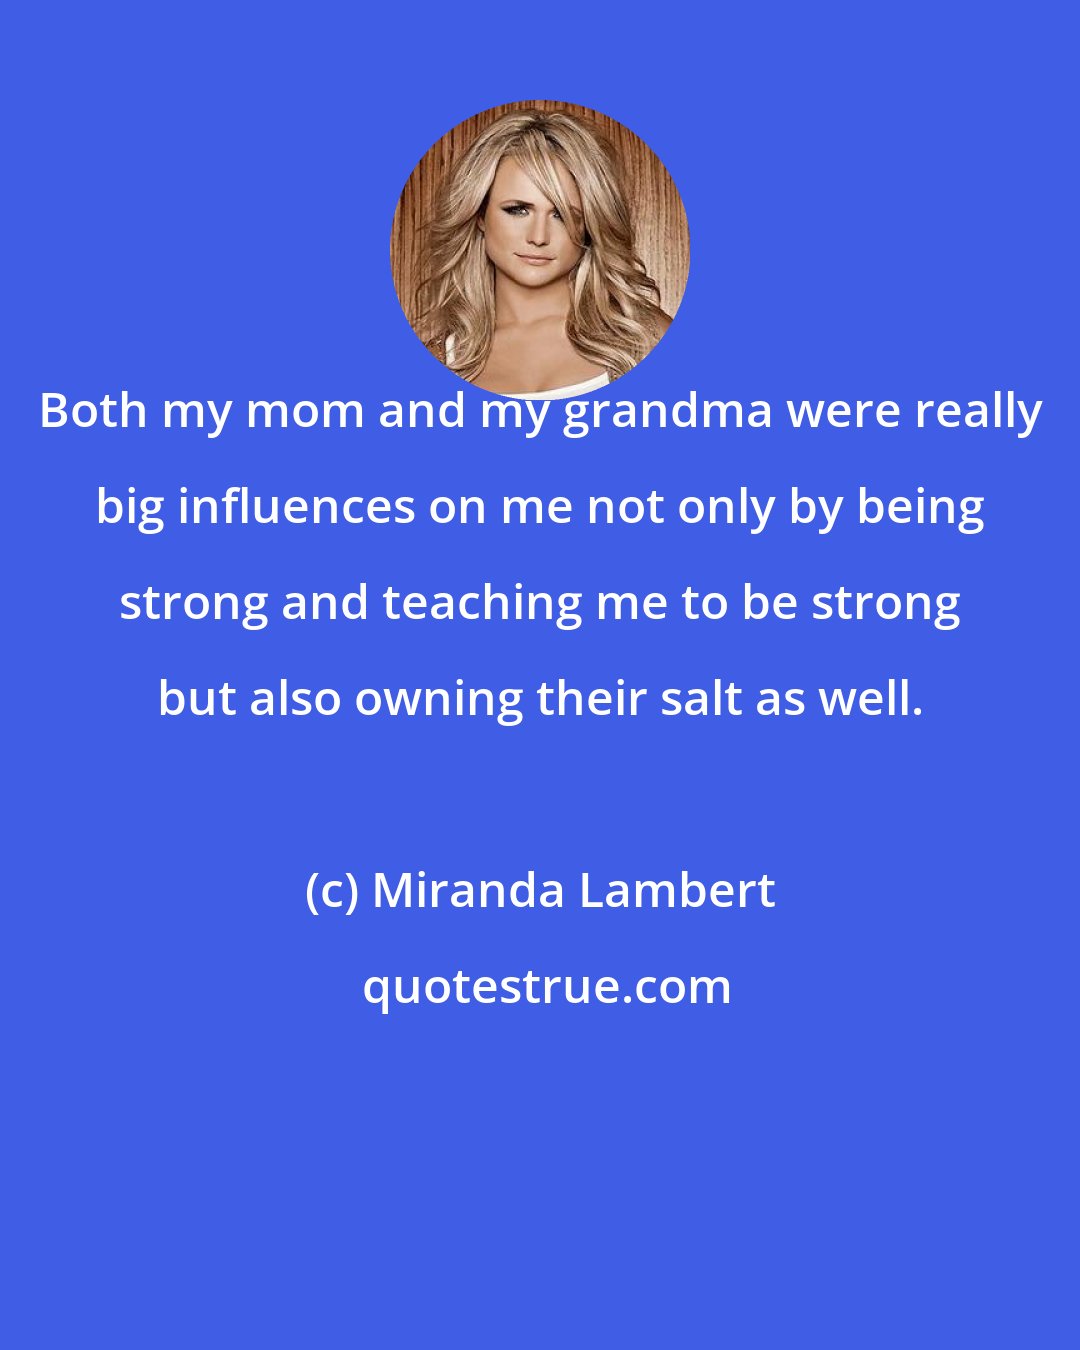 Miranda Lambert: Both my mom and my grandma were really big influences on me not only by being strong and teaching me to be strong but also owning their salt as well.